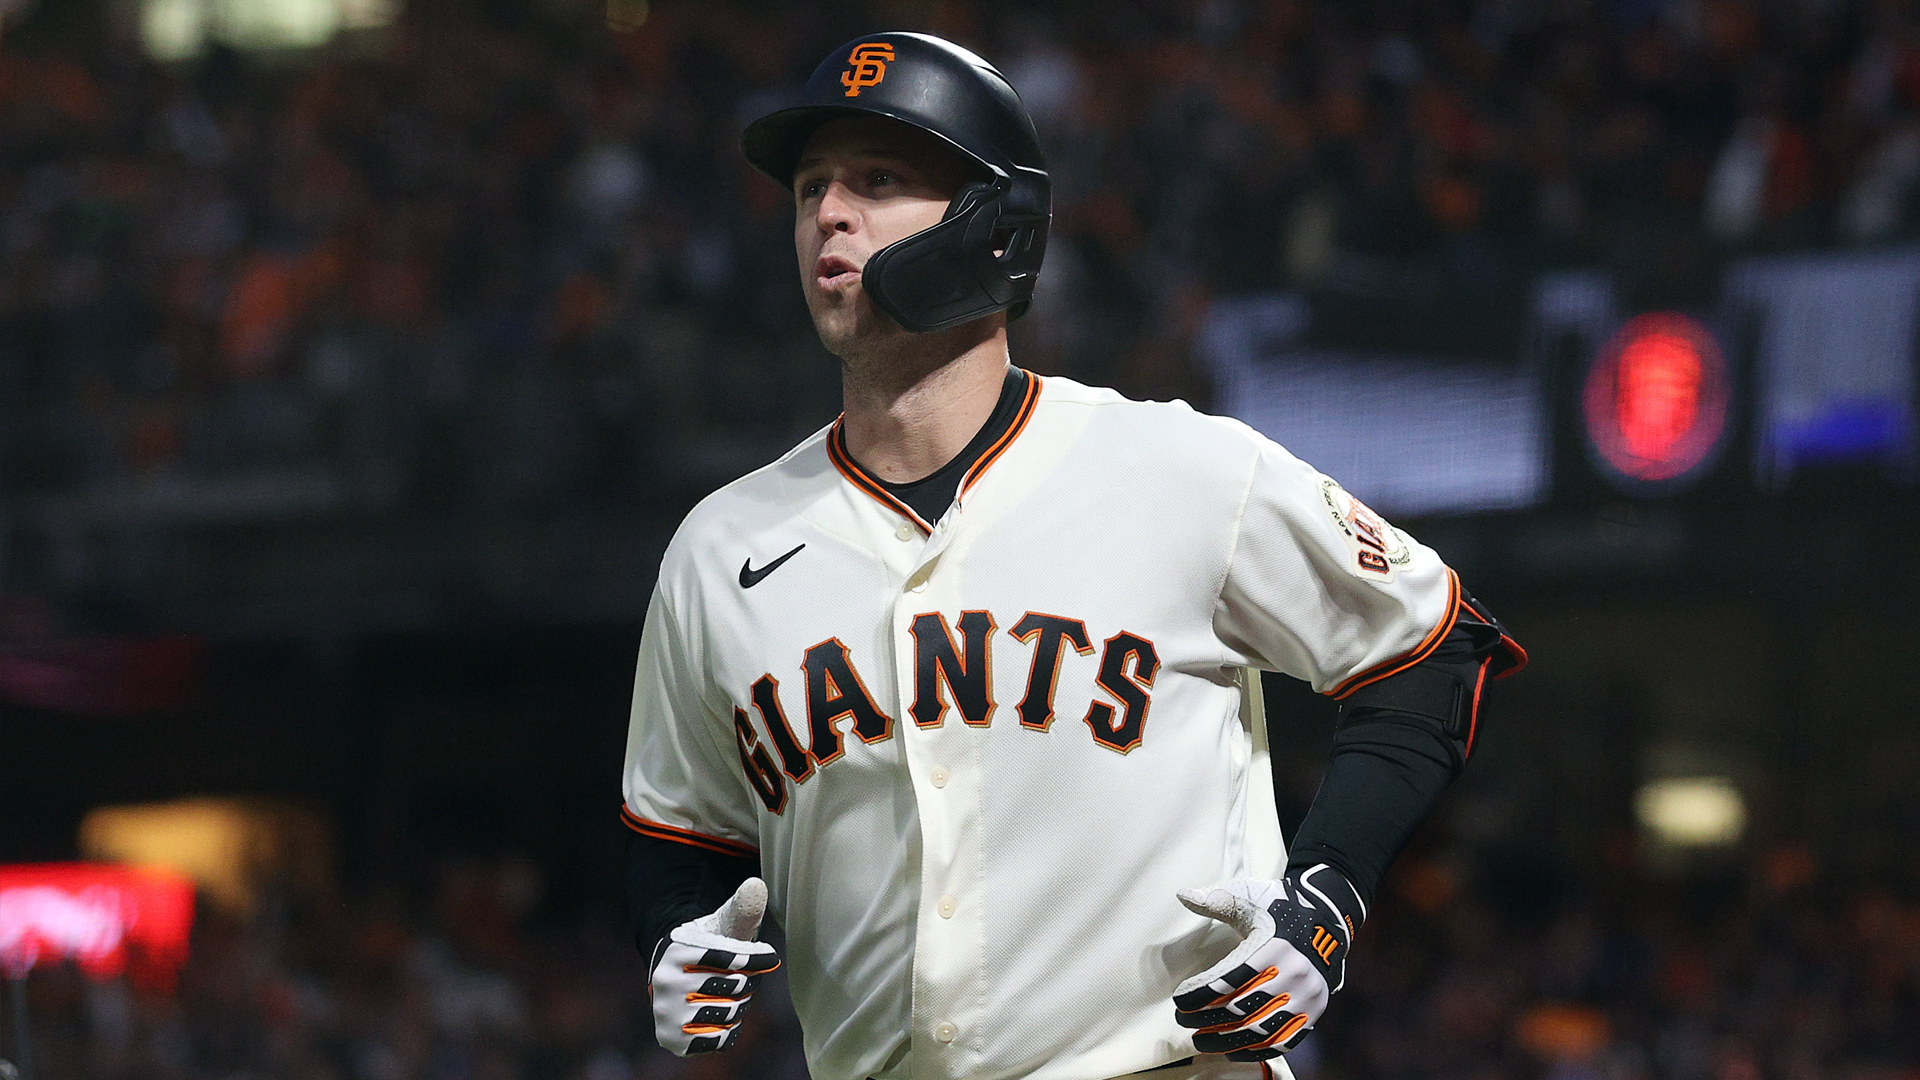 Clayton Kershaw, Dodgers Congratulate Giants' Buster Posey On